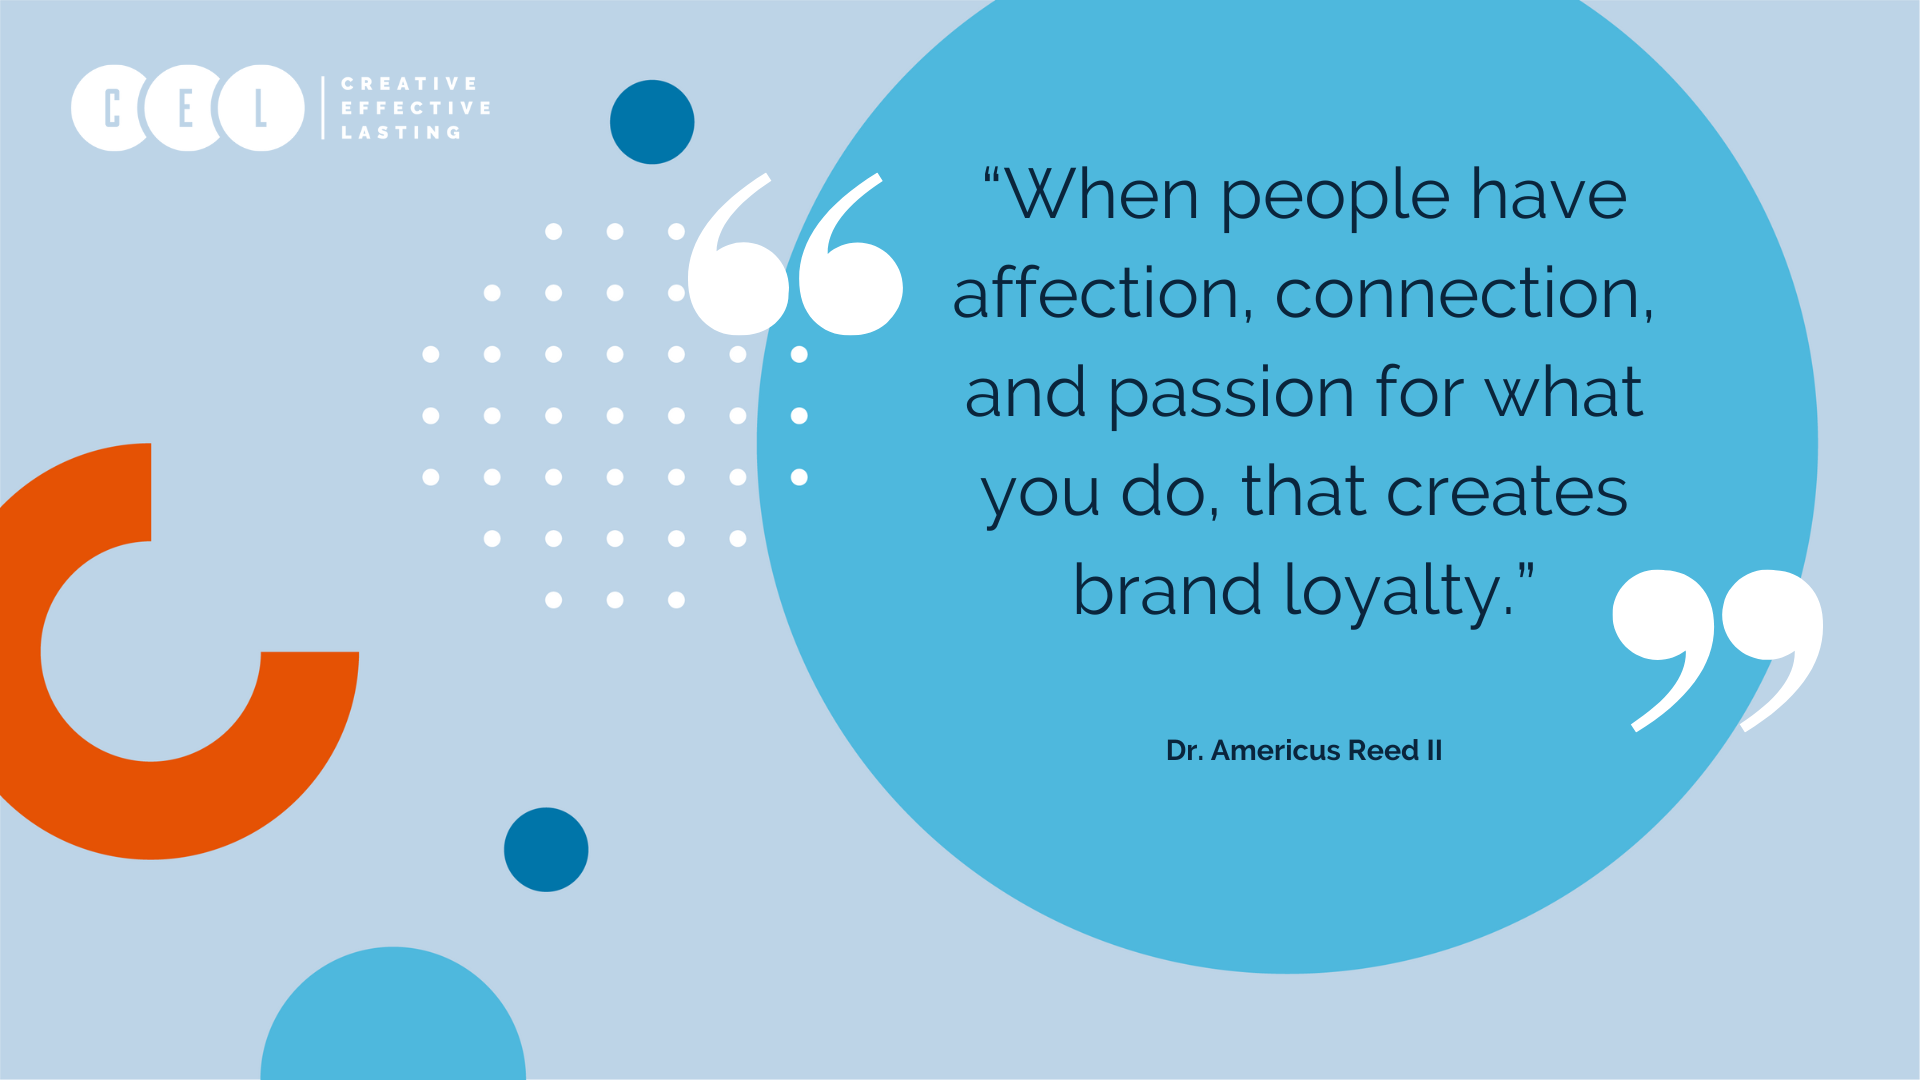 “When people have affection, connection, and passion for what you do, that creates brand loyalty.” - Dr. Americus Reed II